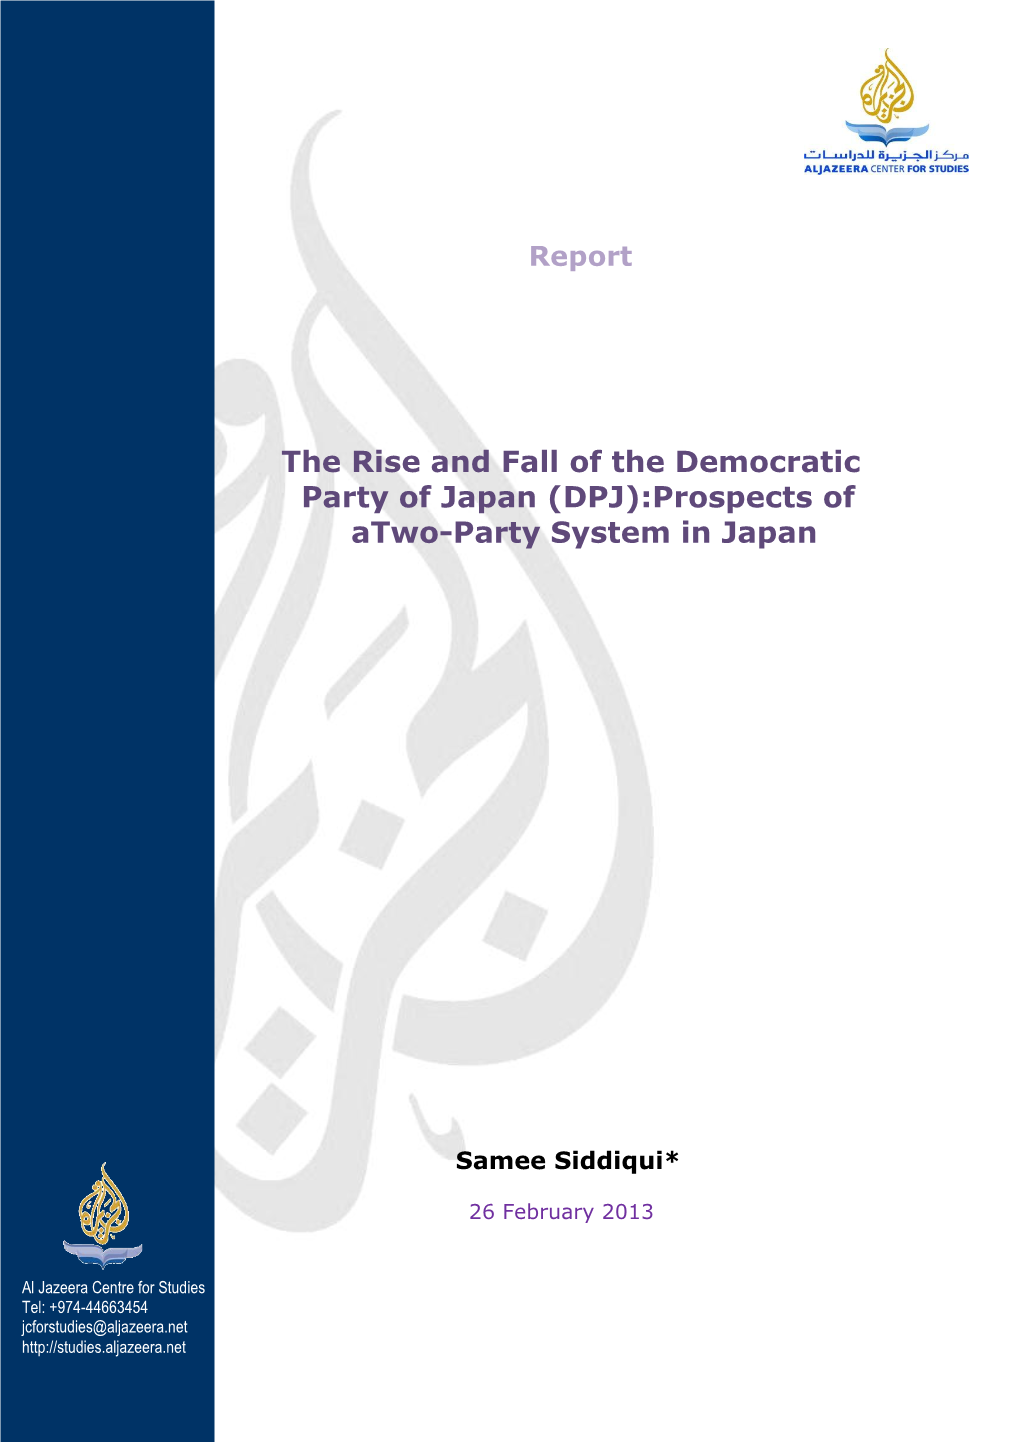 The Rise and Fall of the Democratic Party of Japan (DPJ):Prospects of Atwo-Party System in Japan